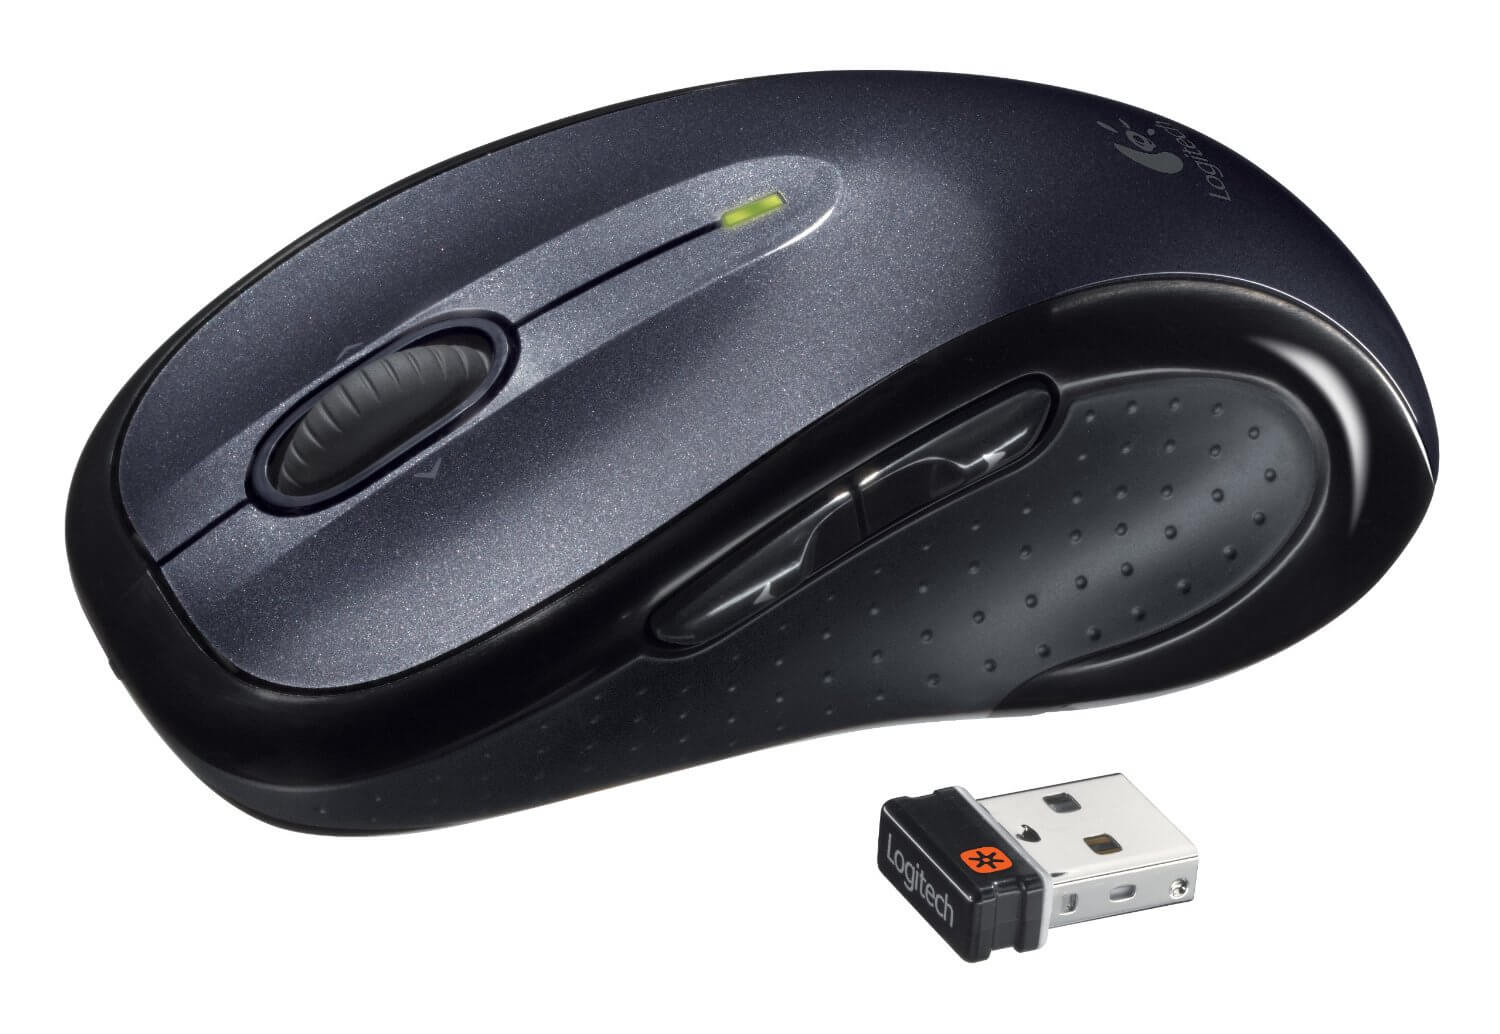 Best mouse for CAD